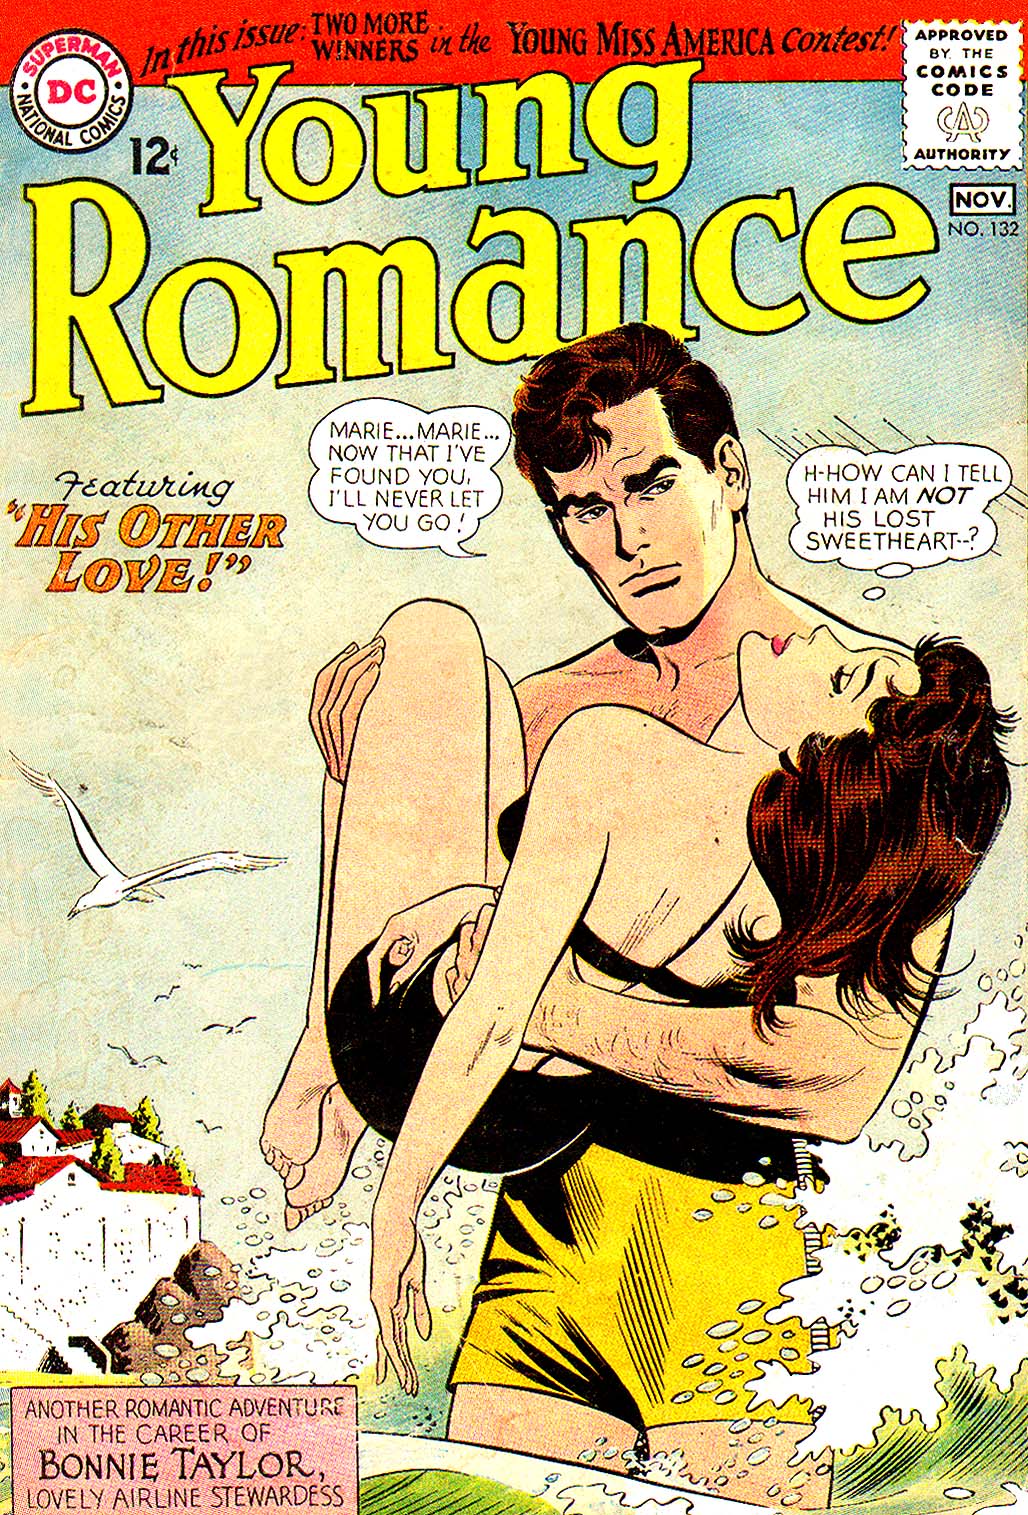 Read online Young Romance comic -  Issue #132 - 1